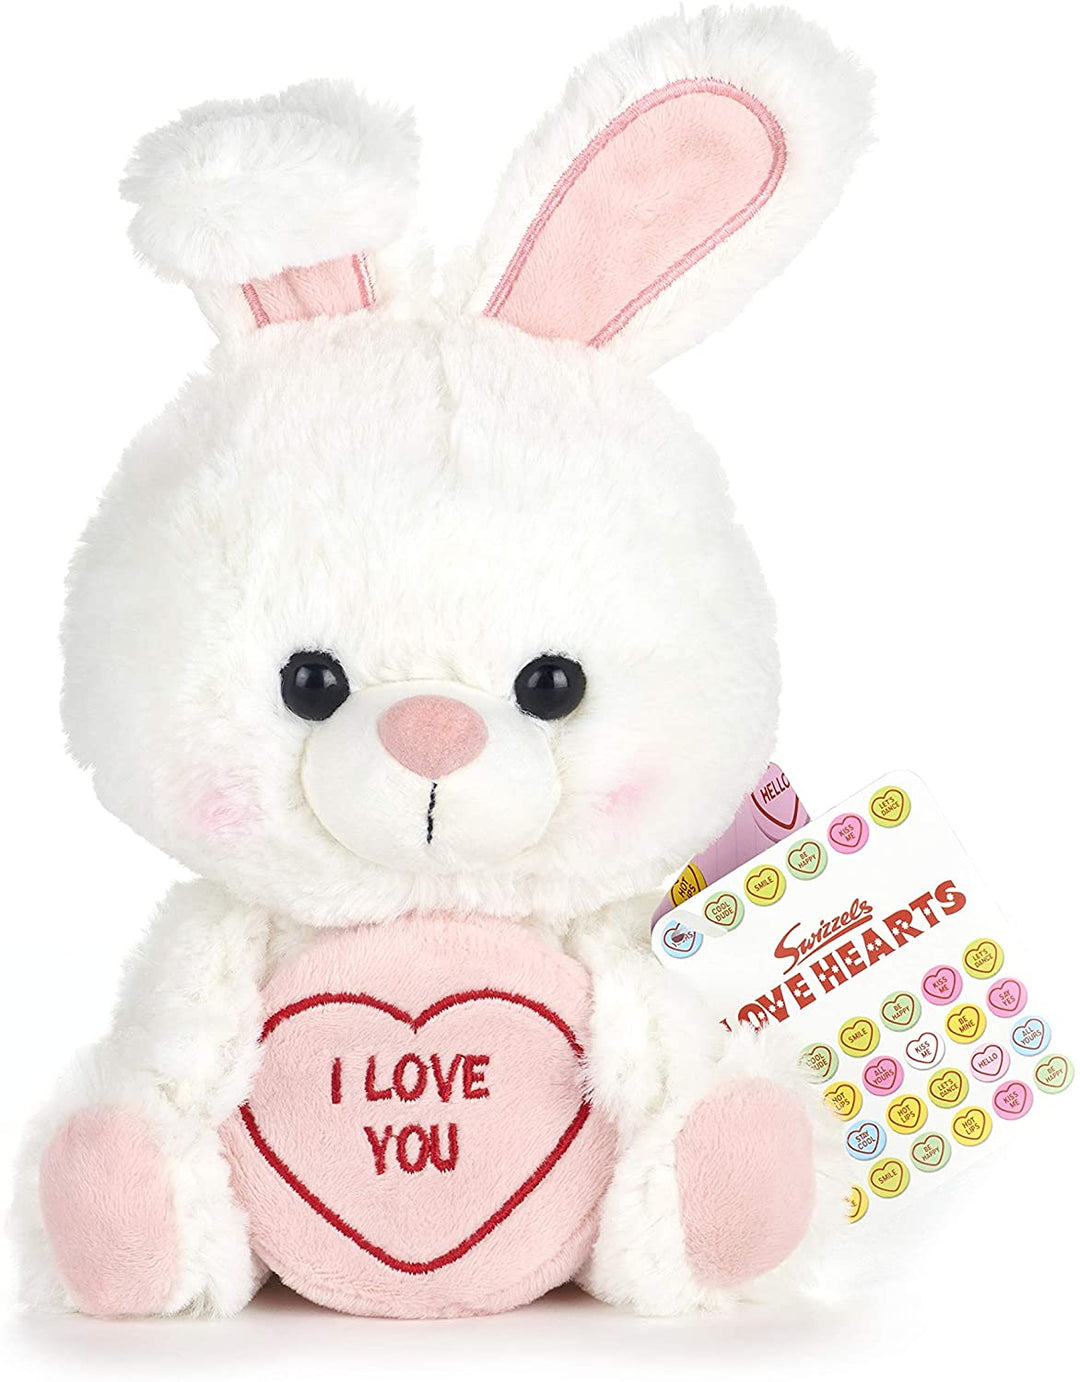 Posh Paws 37328 Swizzels Hearts 18cm (7”) Hase – I Love You Message Stofftier, Rosa &amp; Weiß